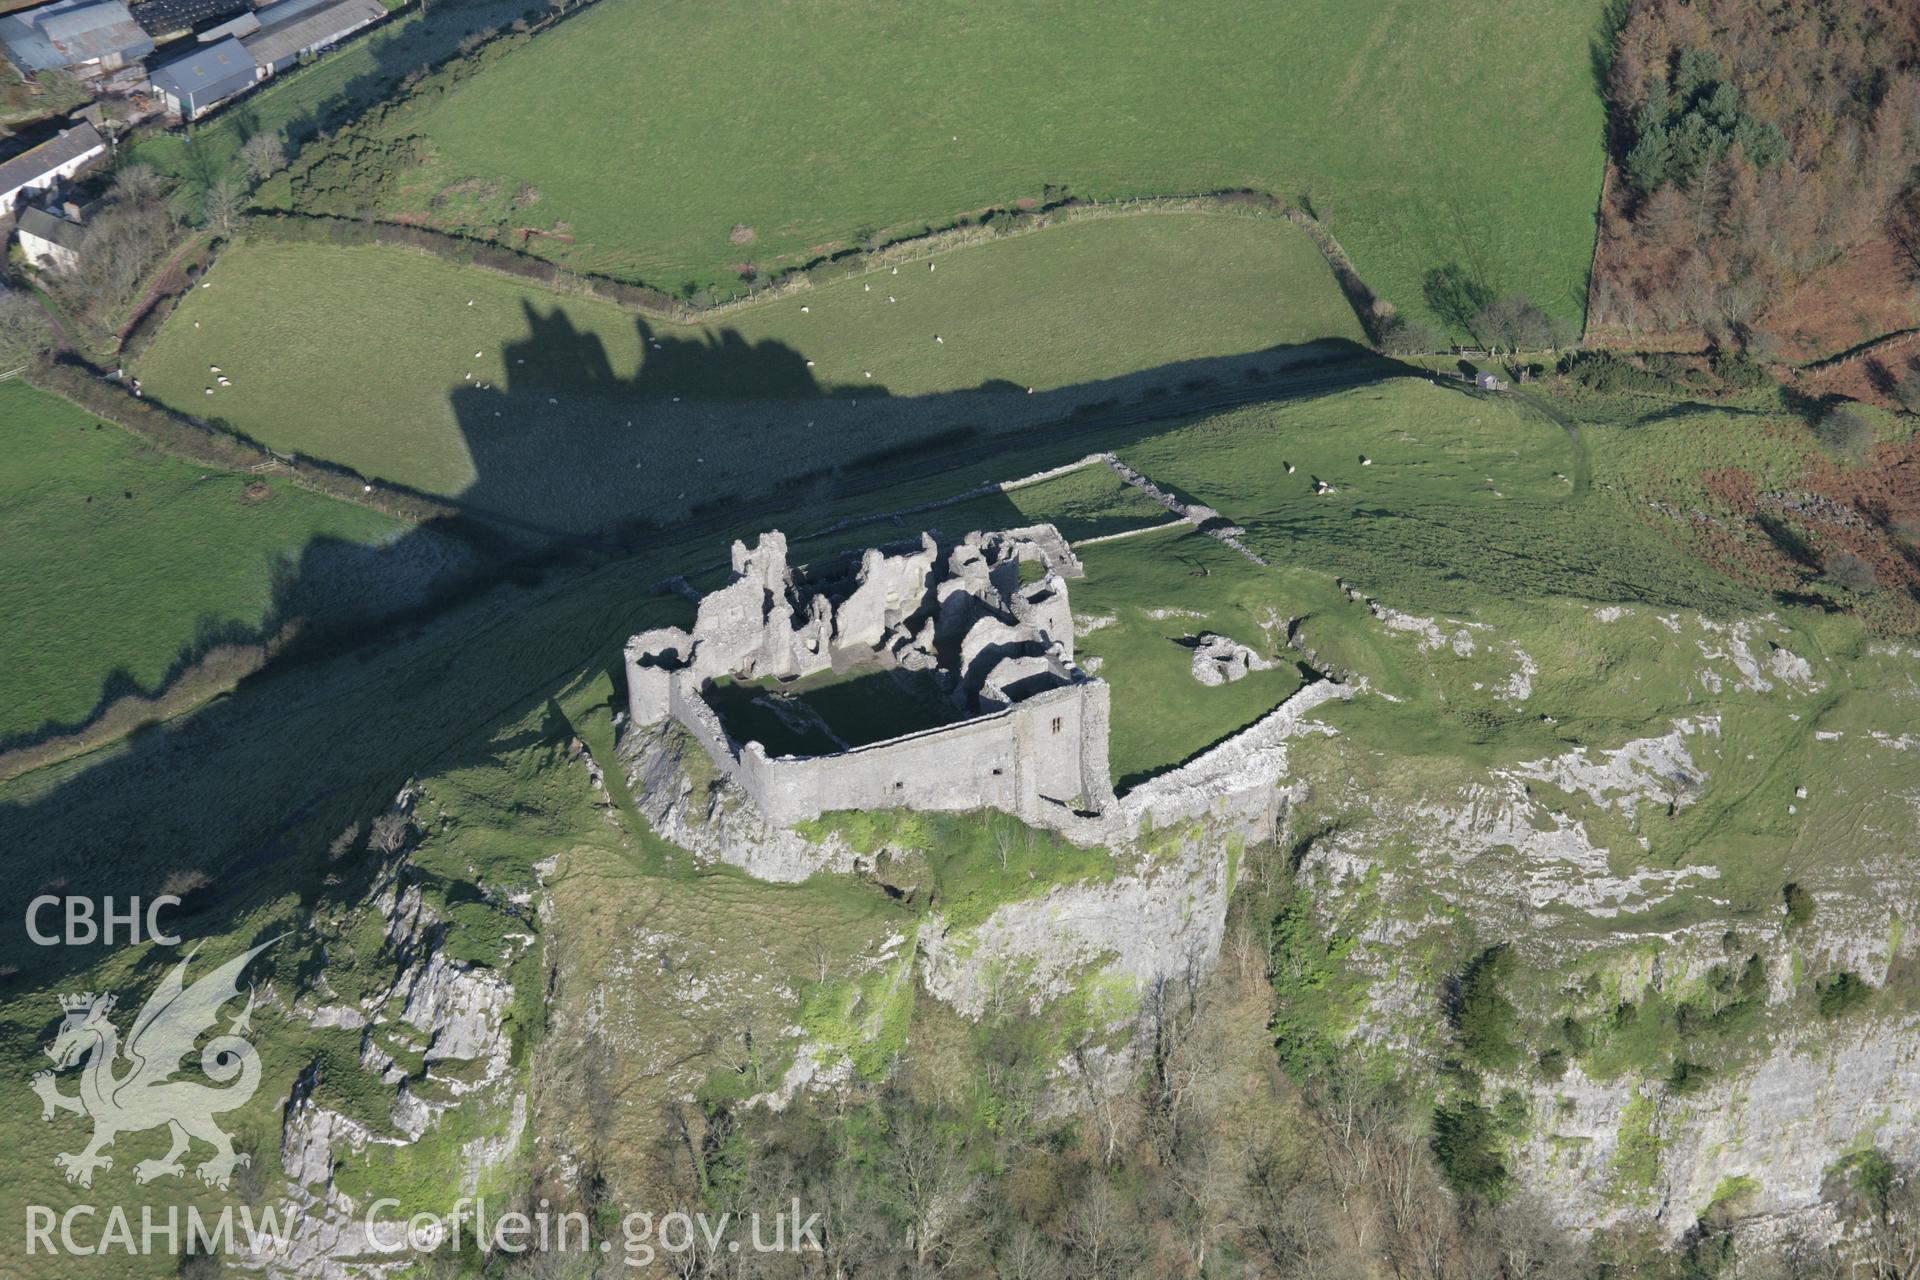 RCAHMW colour oblique photograph of Carreg Cennen Castle, view from south. Taken by Toby Driver on 17/11/2005.